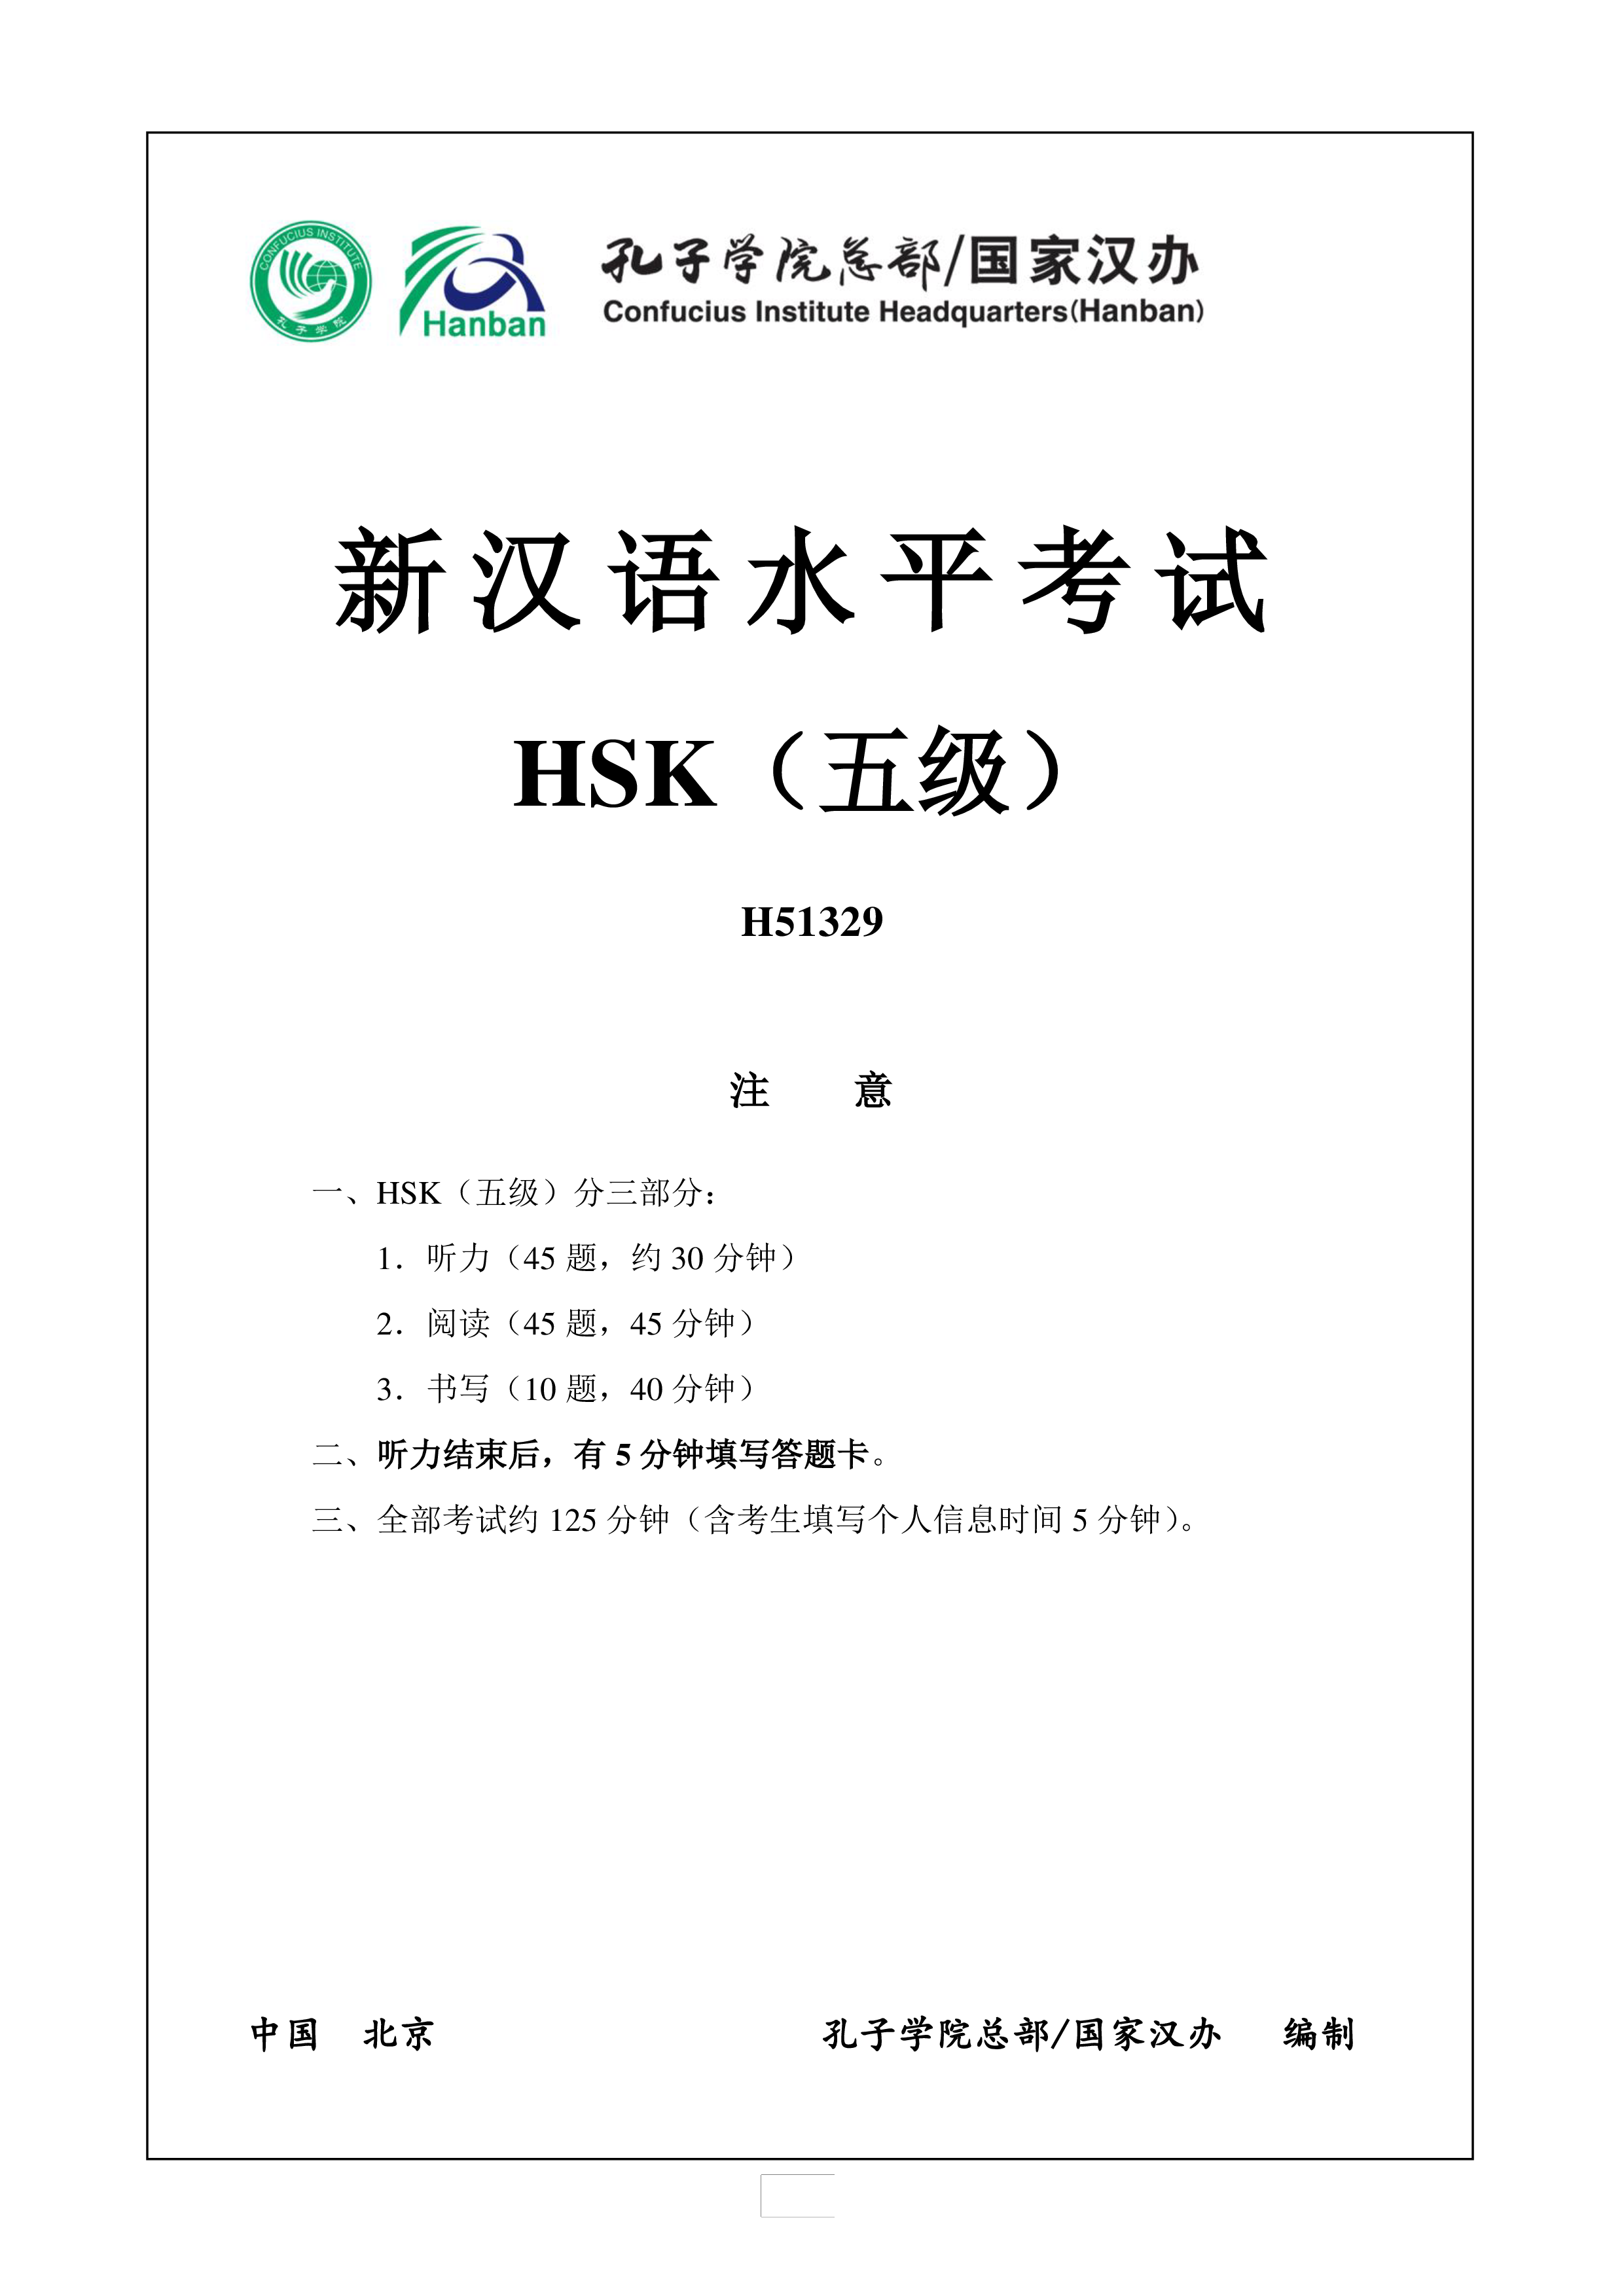 hsk5 chinese exam, incl audio and answer # h51329 template